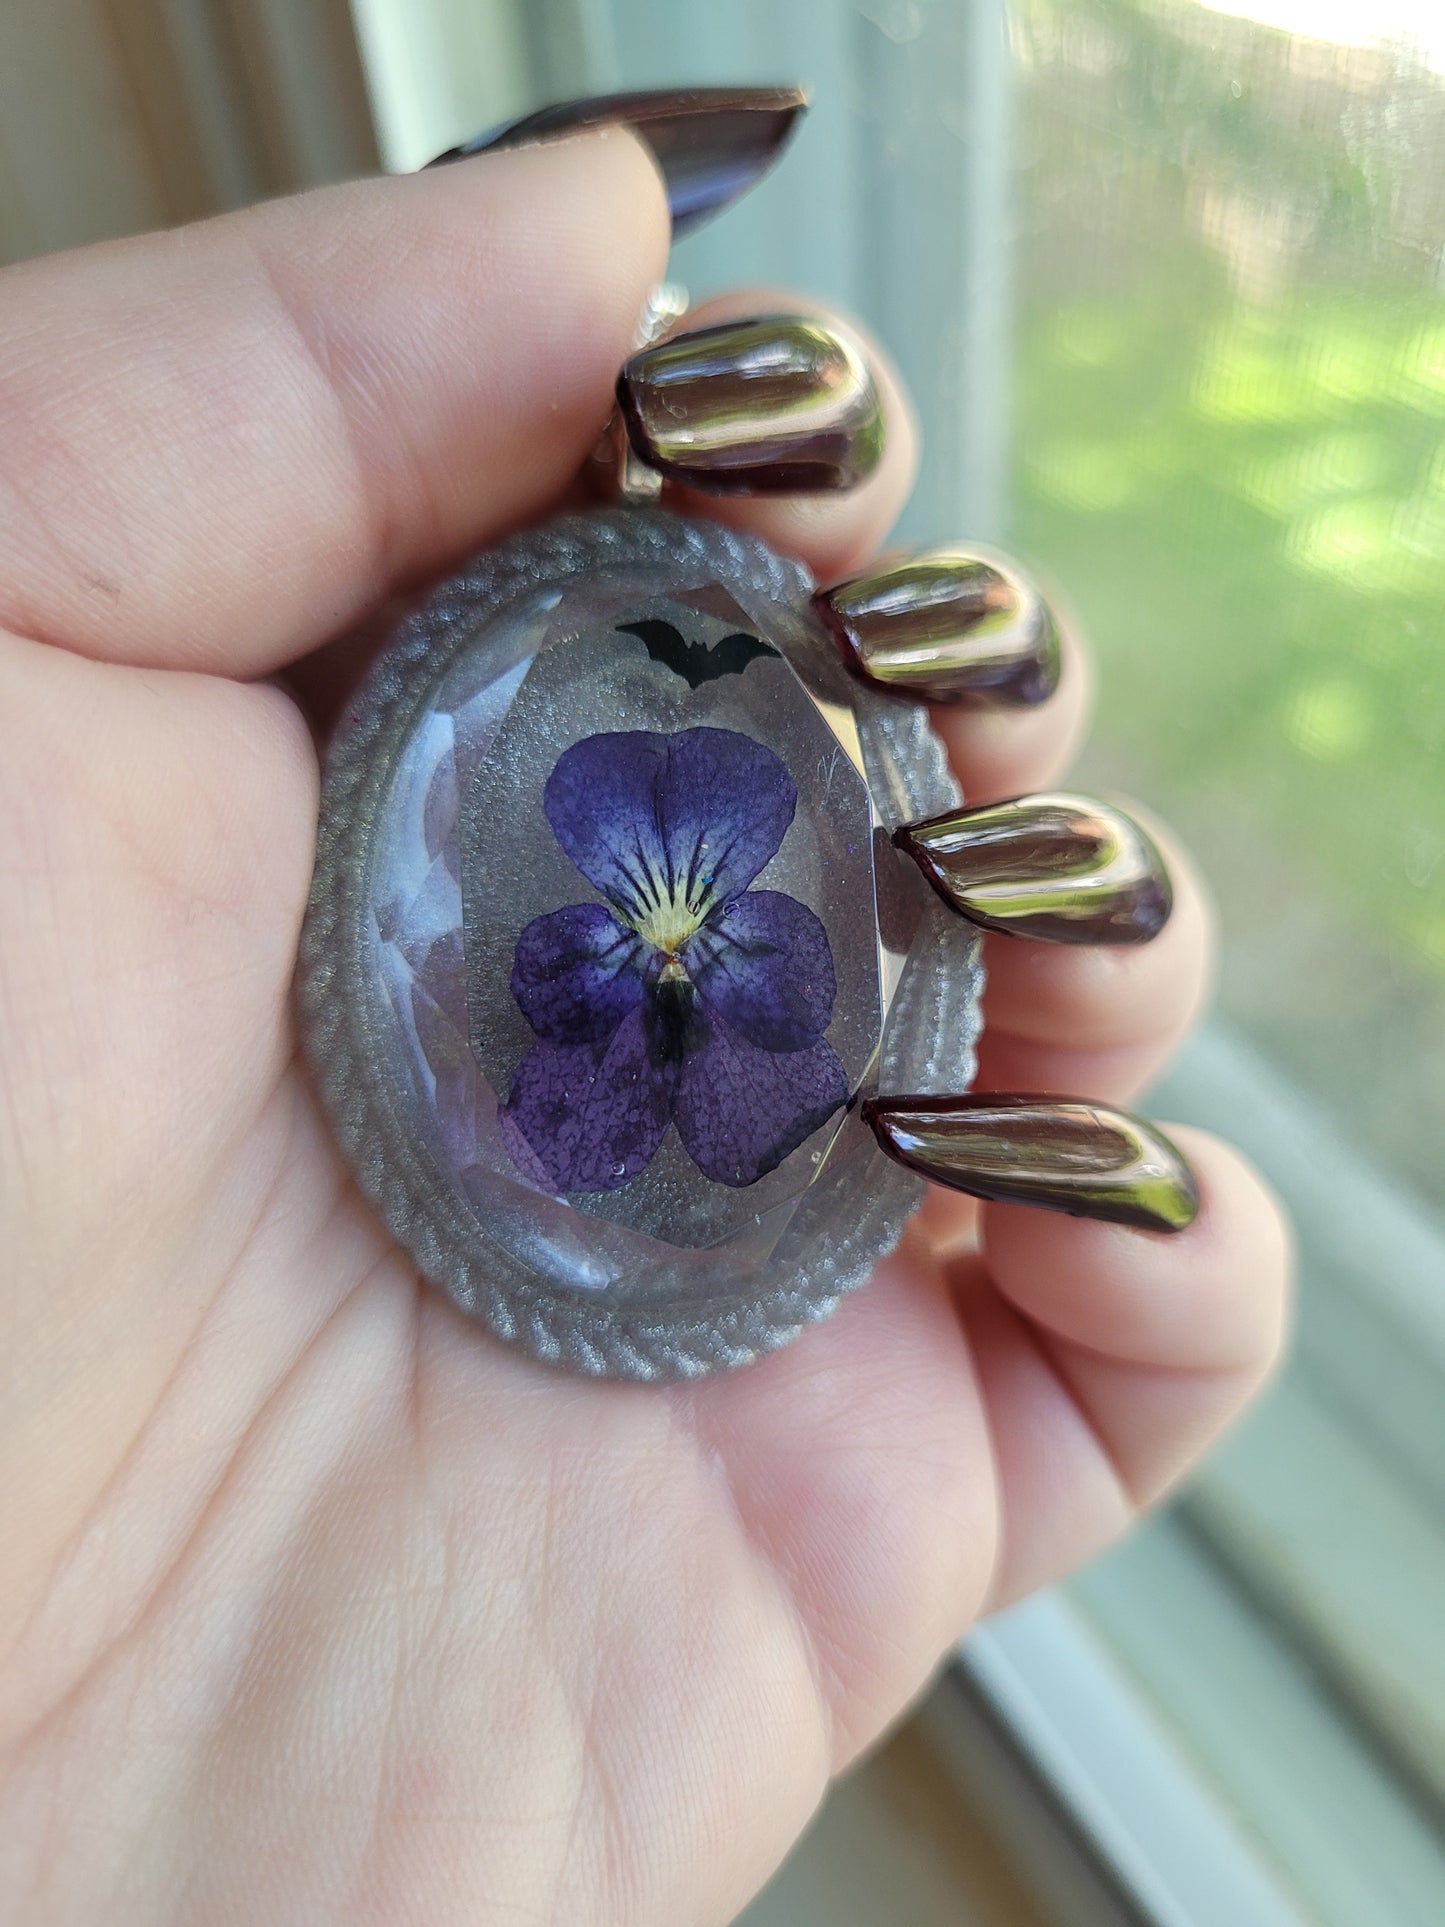 Goth Silver and Purple Pressed Pansy Resin Pendant with Black Bat Glitter